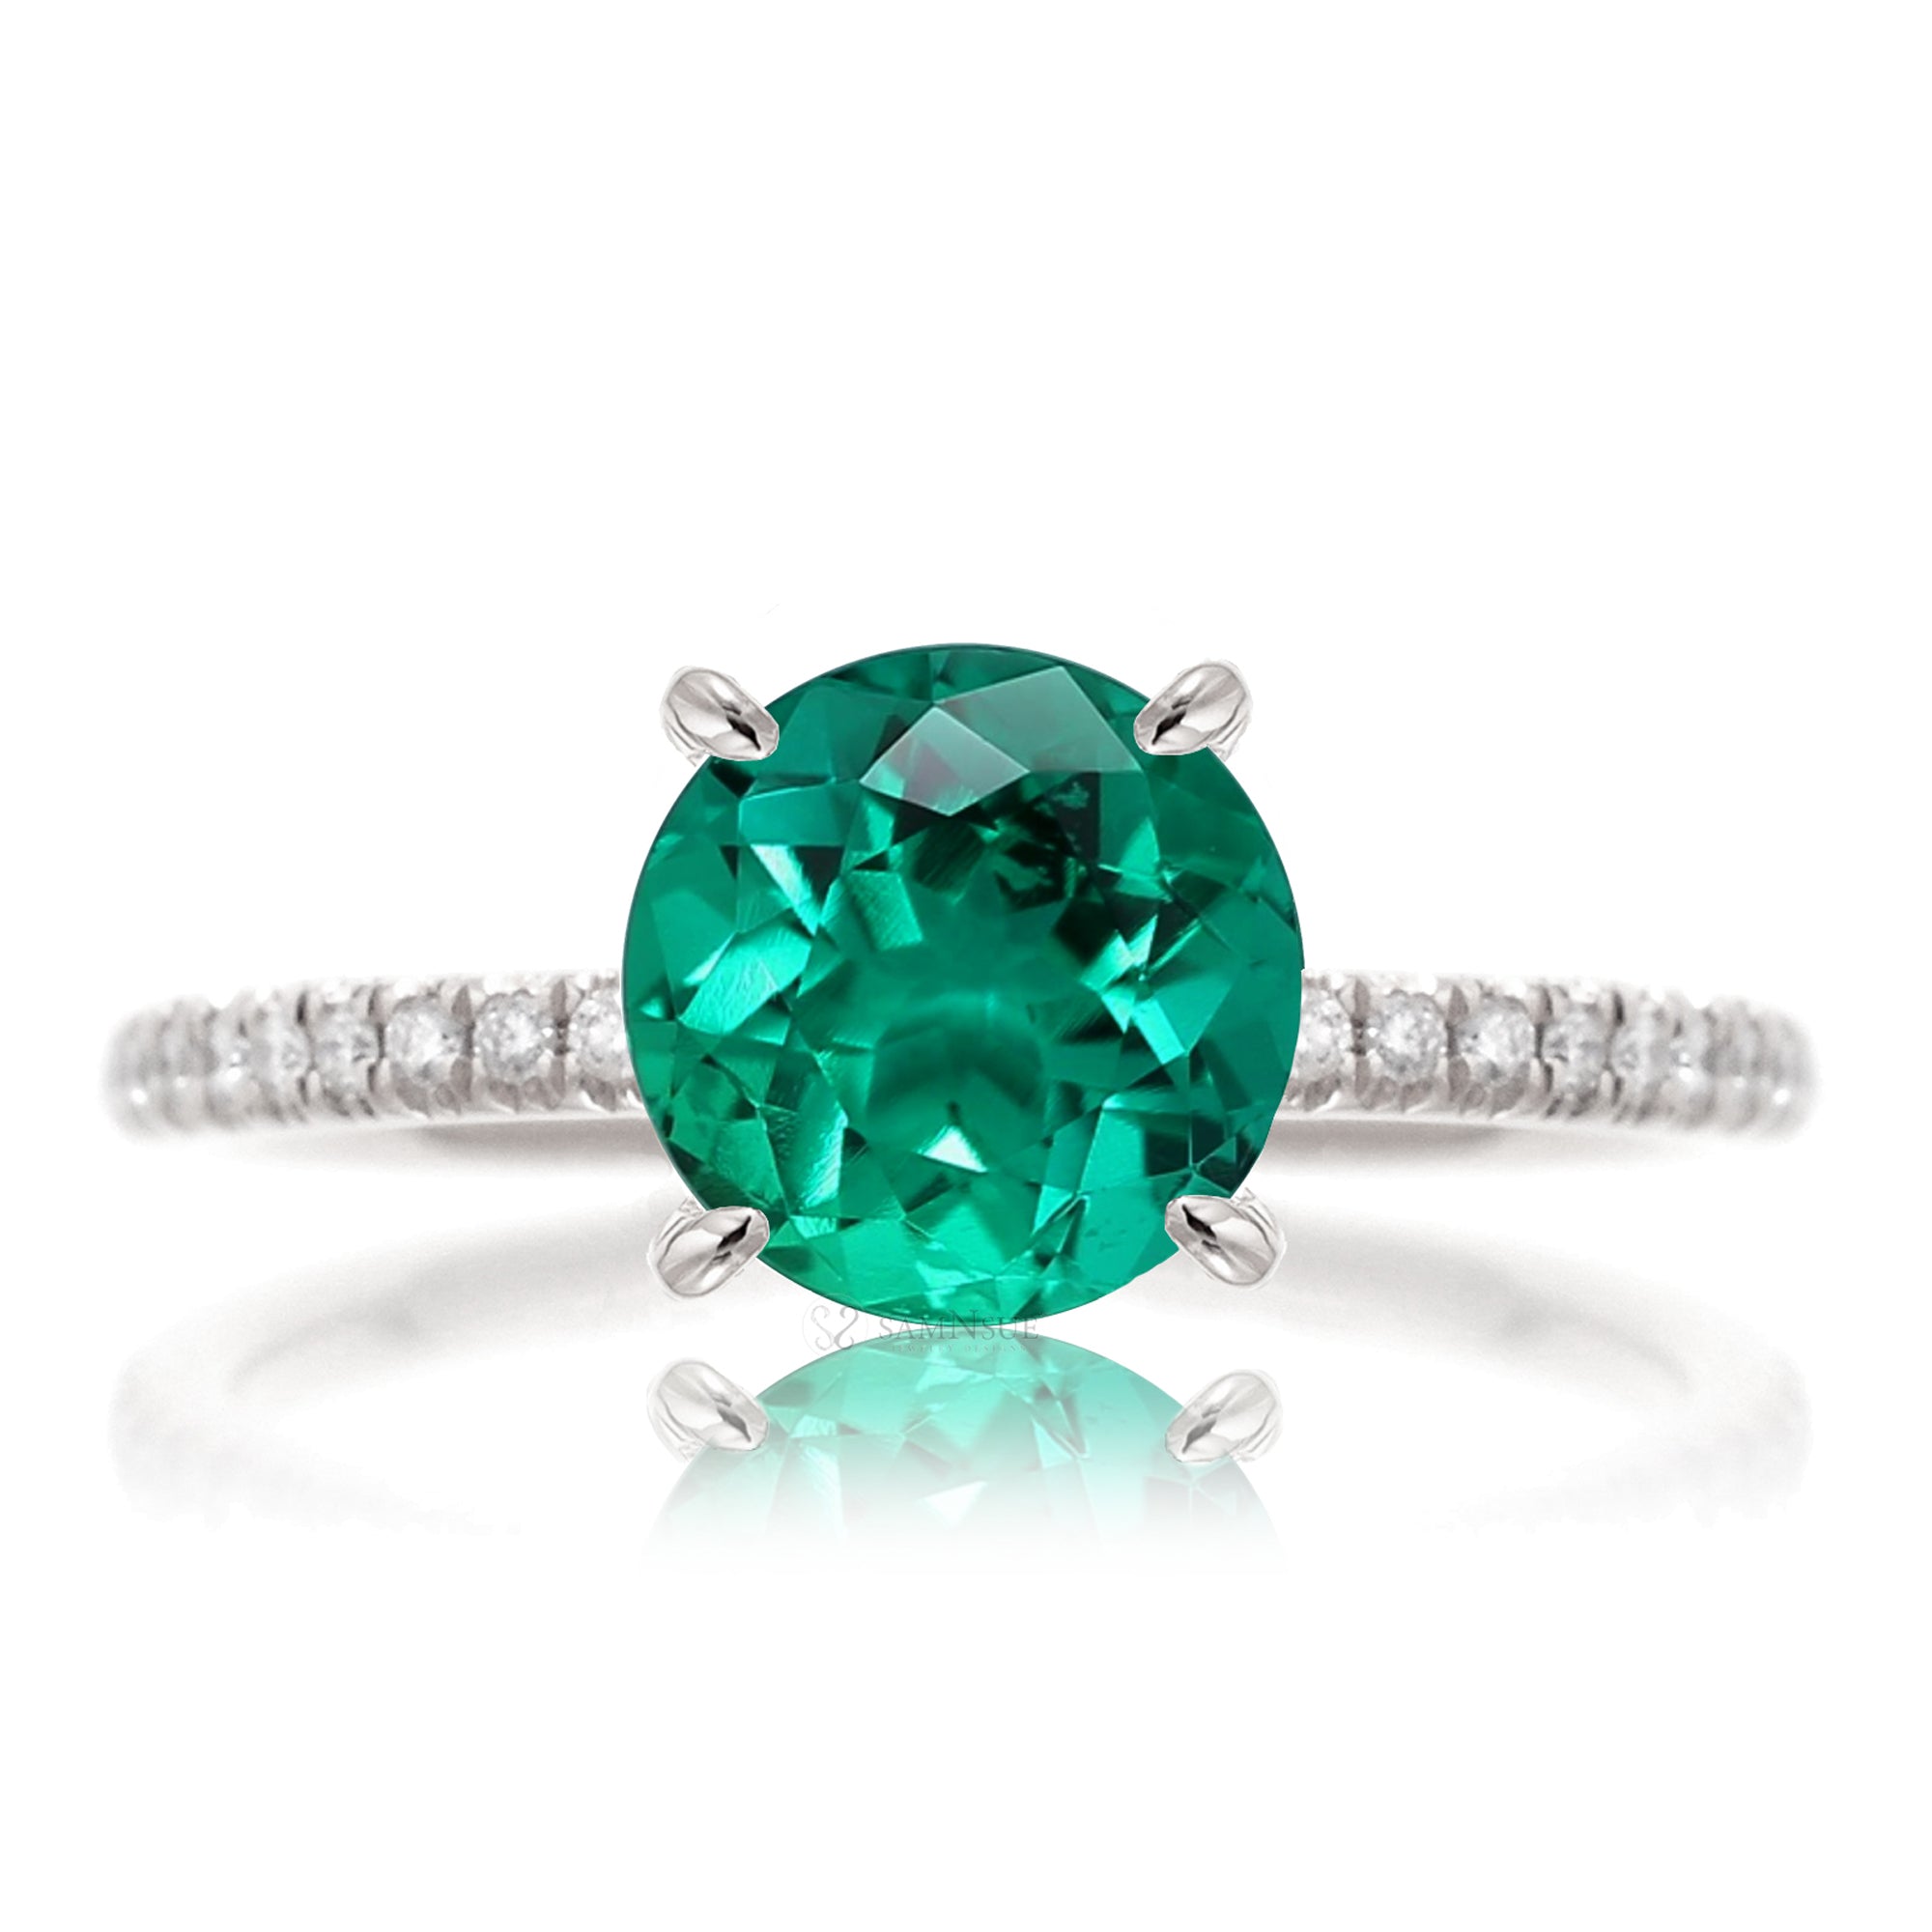 Round green emerald diamond band engagement ring white gold - the Ava